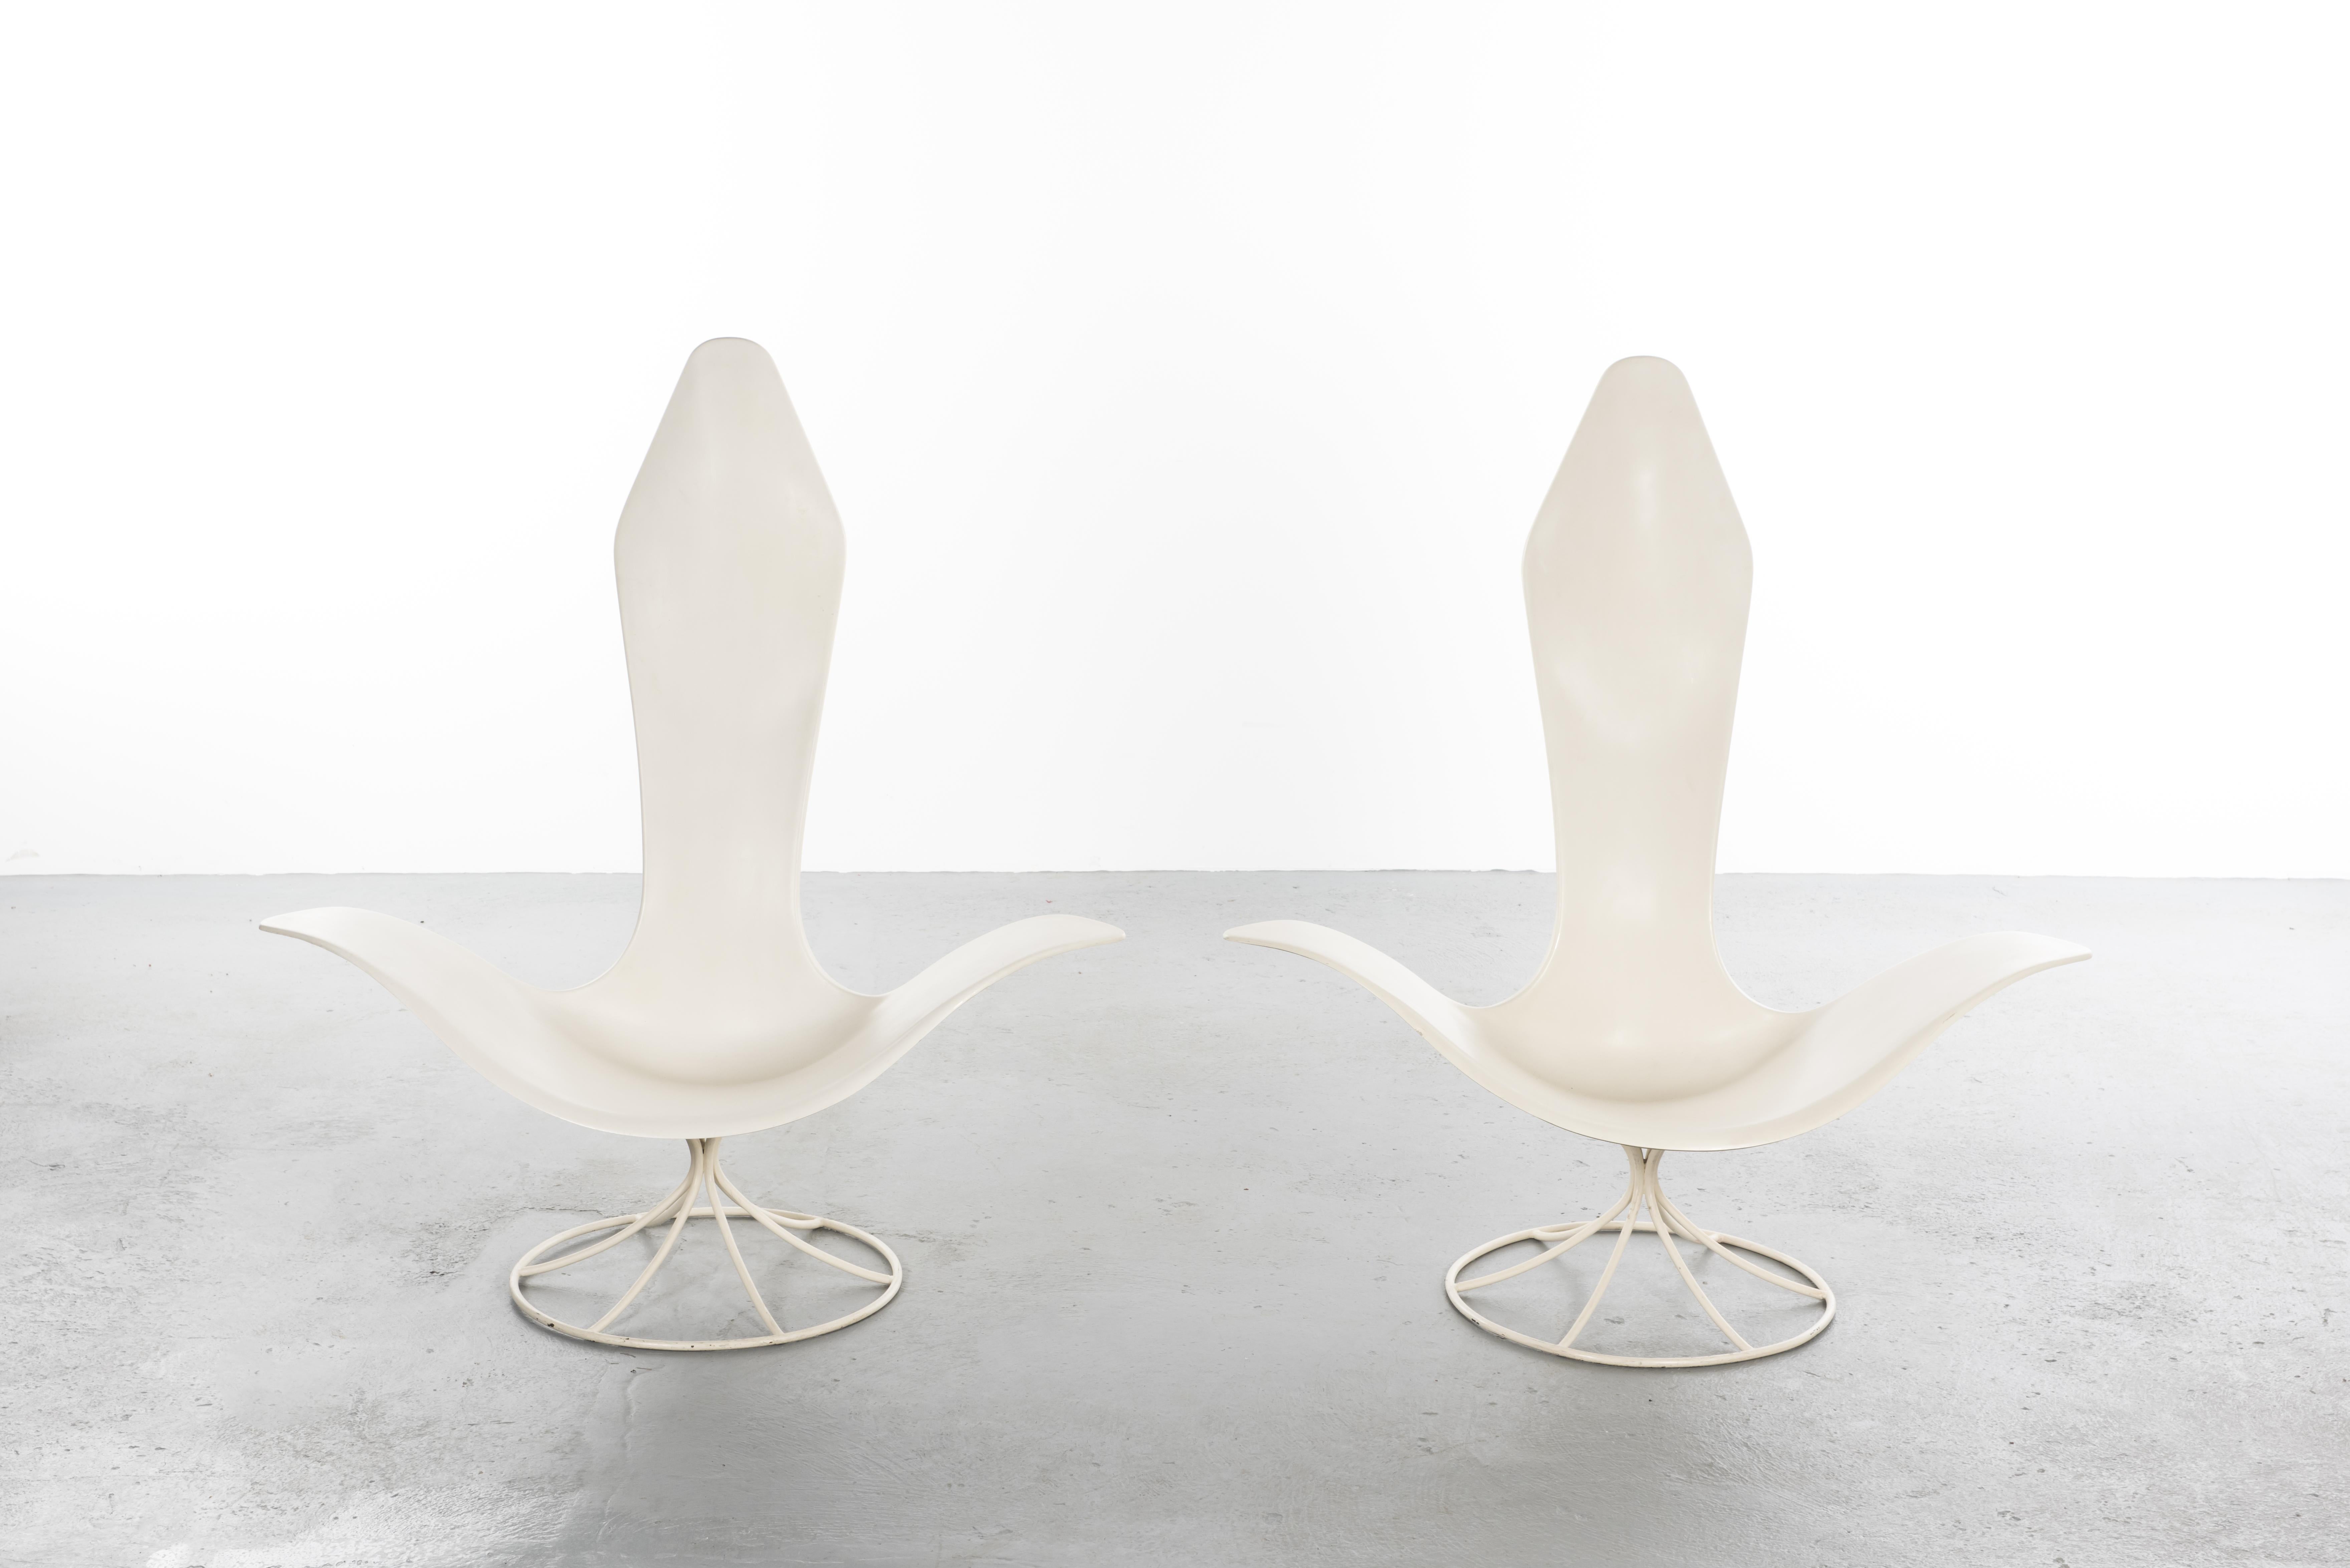 Rare complete set including a pair of chairs Tulip model 120-LF and a coffee table
Fiberglass reinforced polyester shell symbolizing three large open petals, white lacquered iron base formed of a diabolo base with six angled blades joined on a